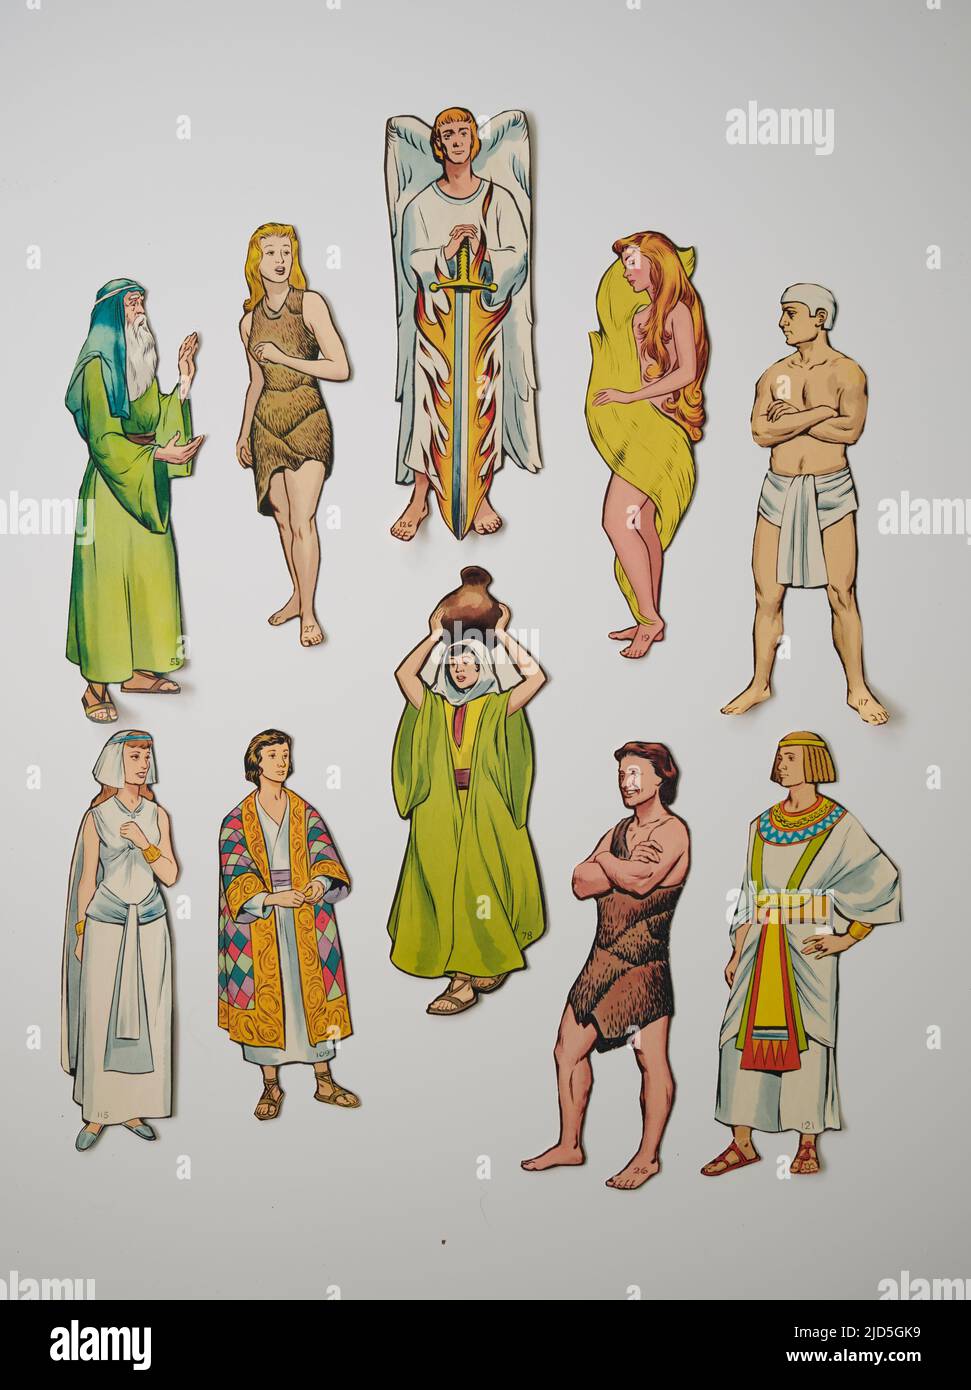 Old Bible Study Educational Cut Out Figures Banque D'Images